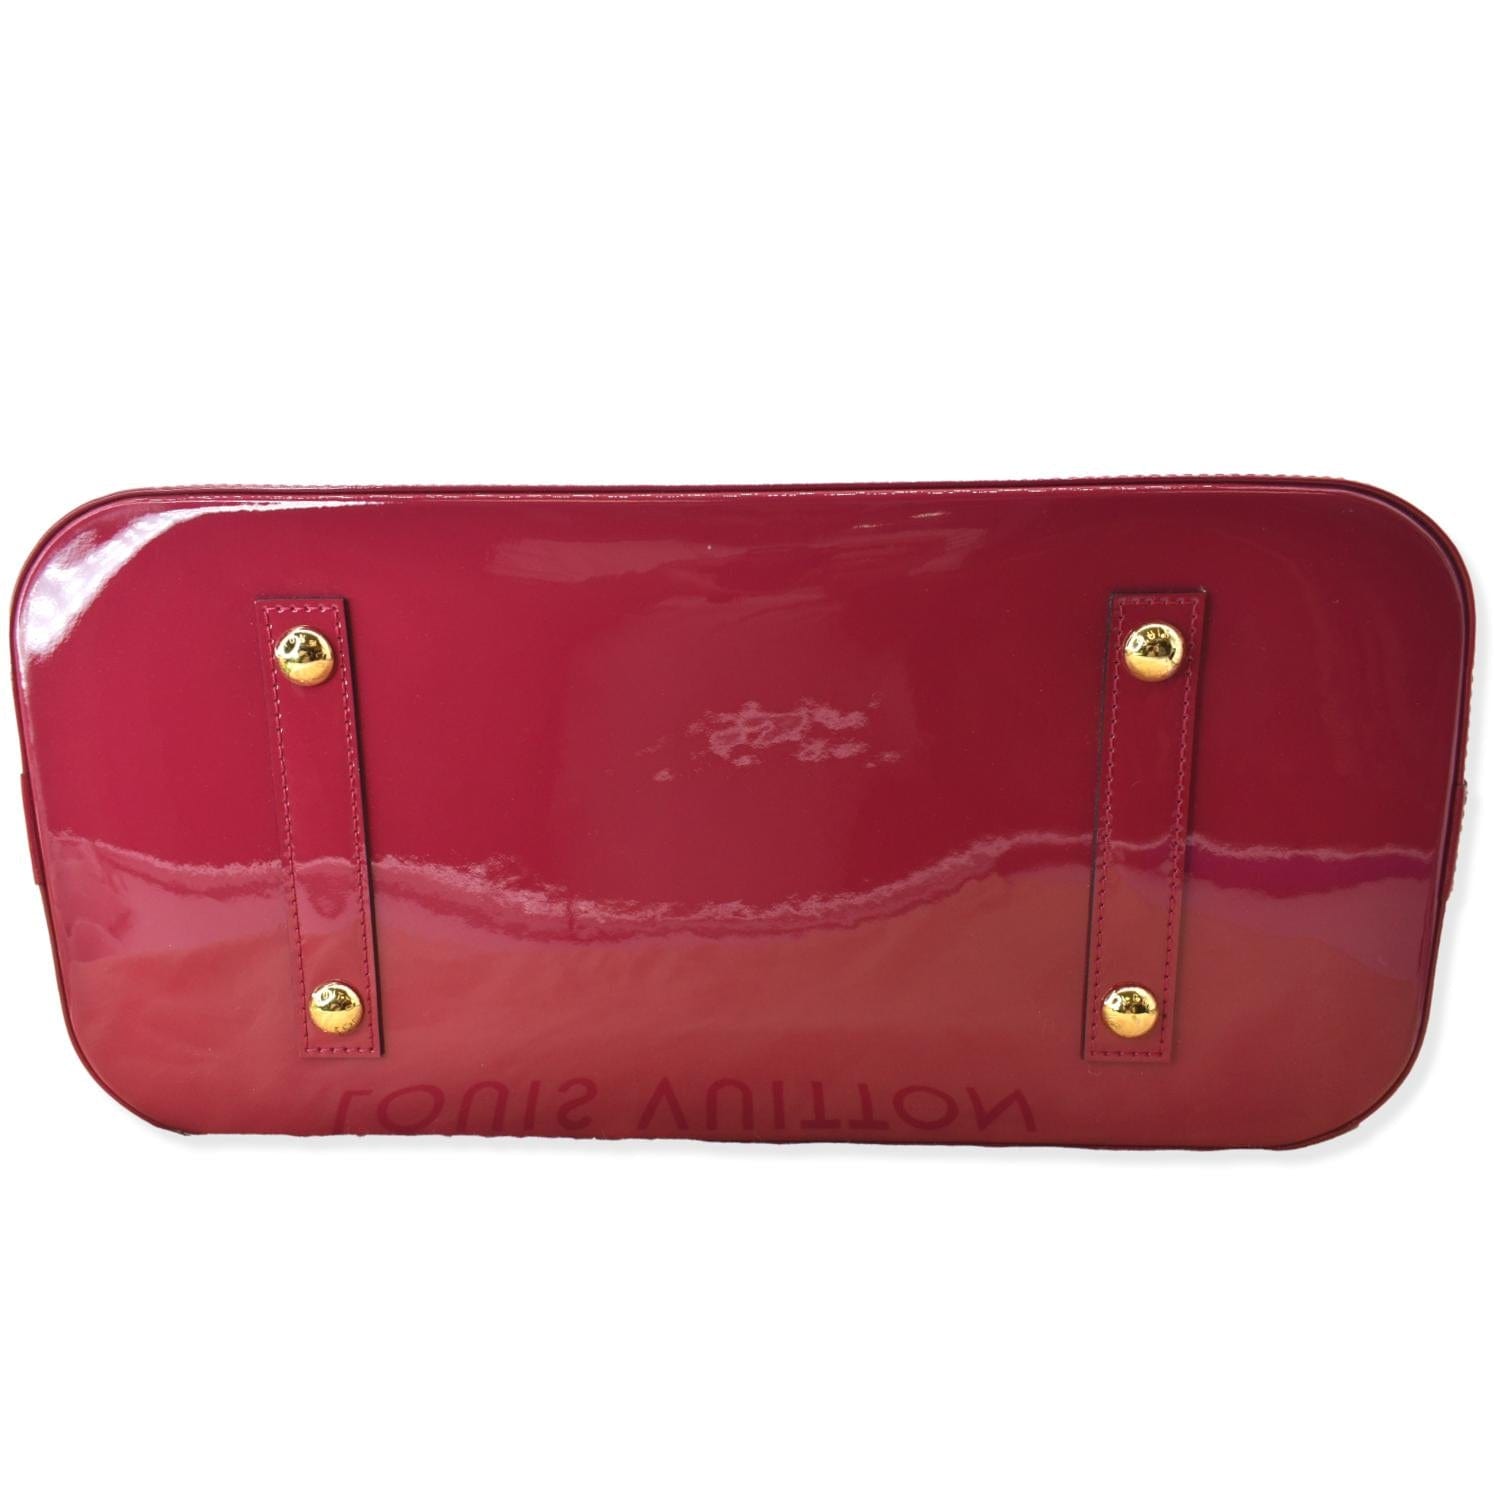 LOUIS VUITTON c.2015 “Clemence” Red Monogram Vernis Patent Leather